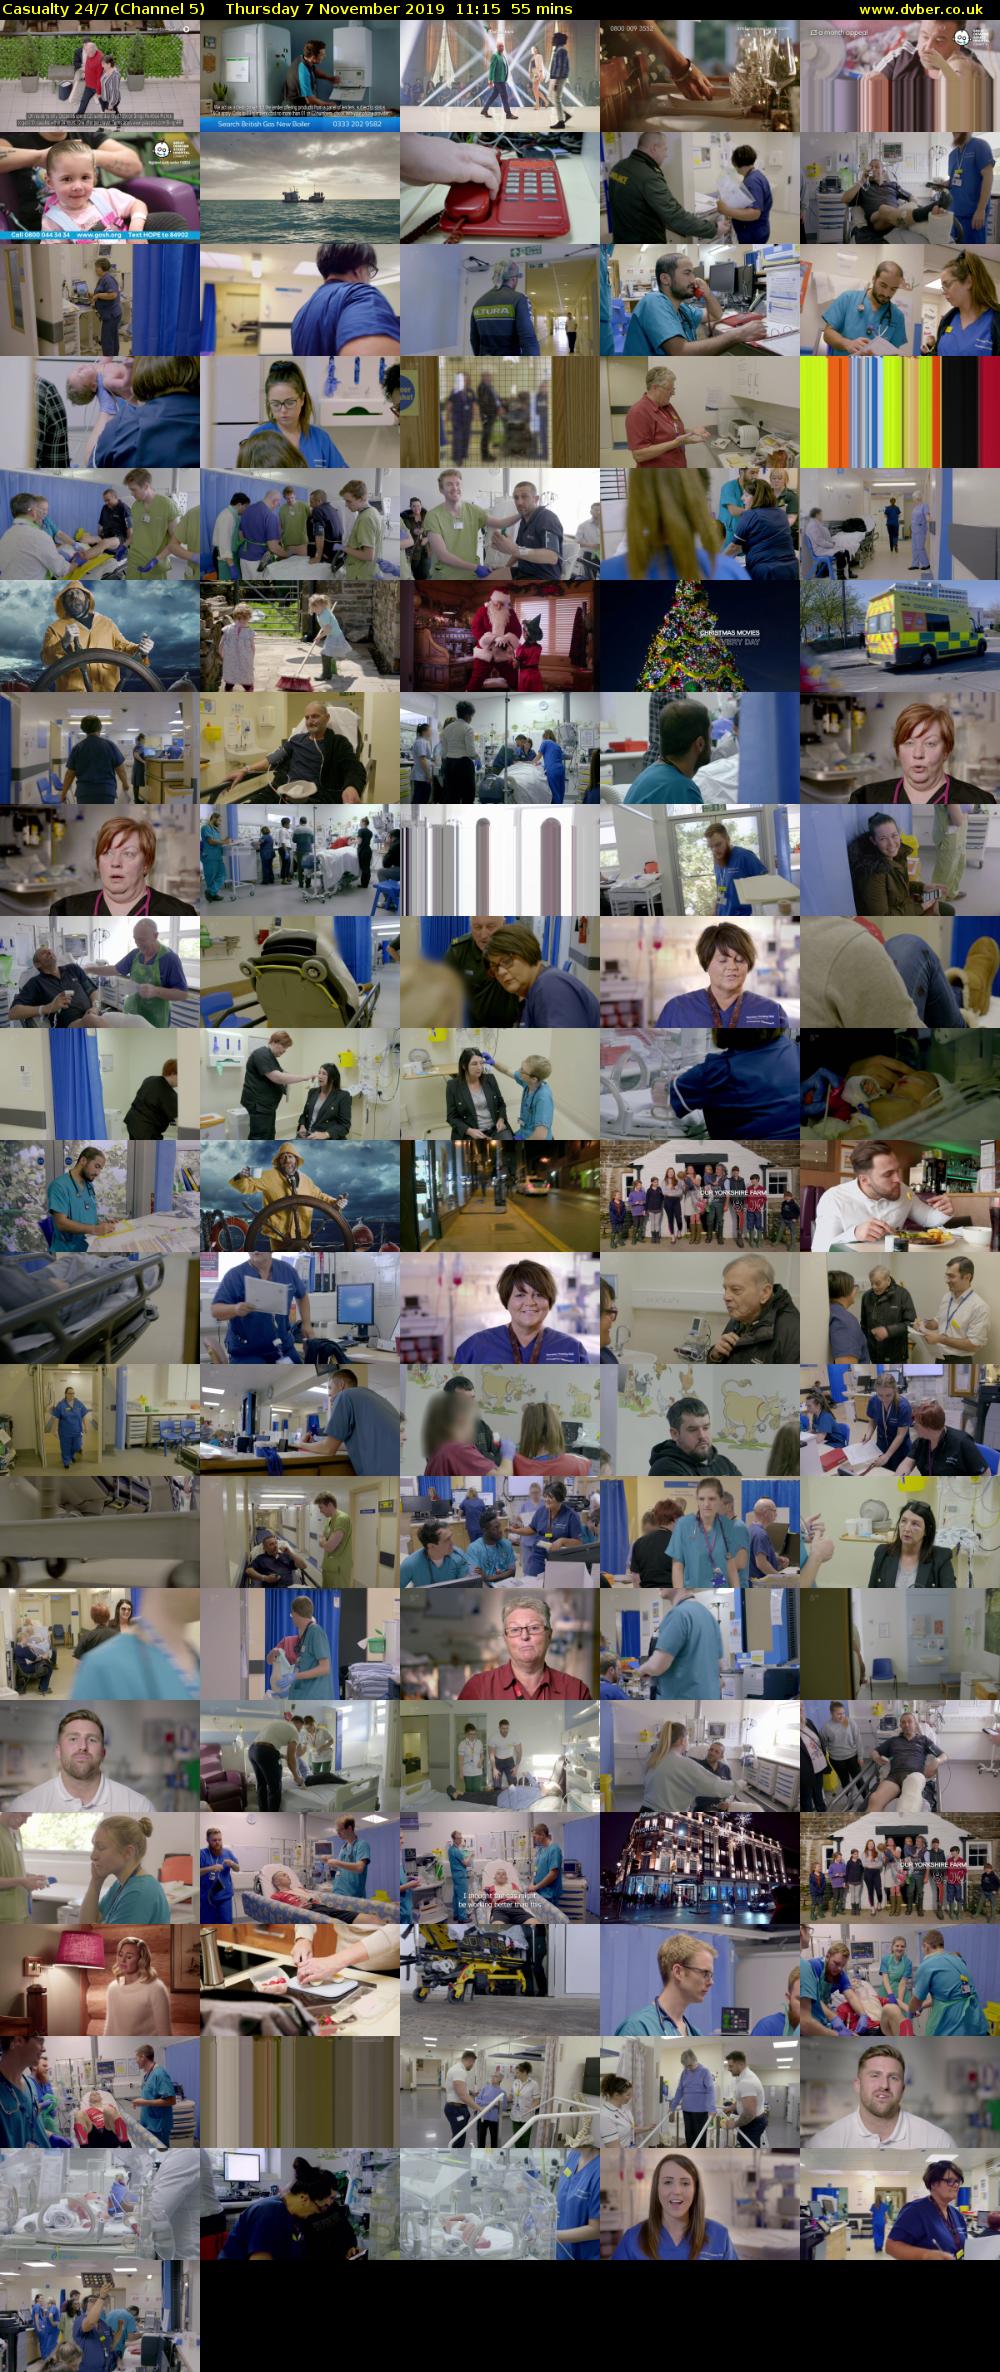 Casualty 24/7 (Channel 5) Thursday 7 November 2019 11:15 - 12:10